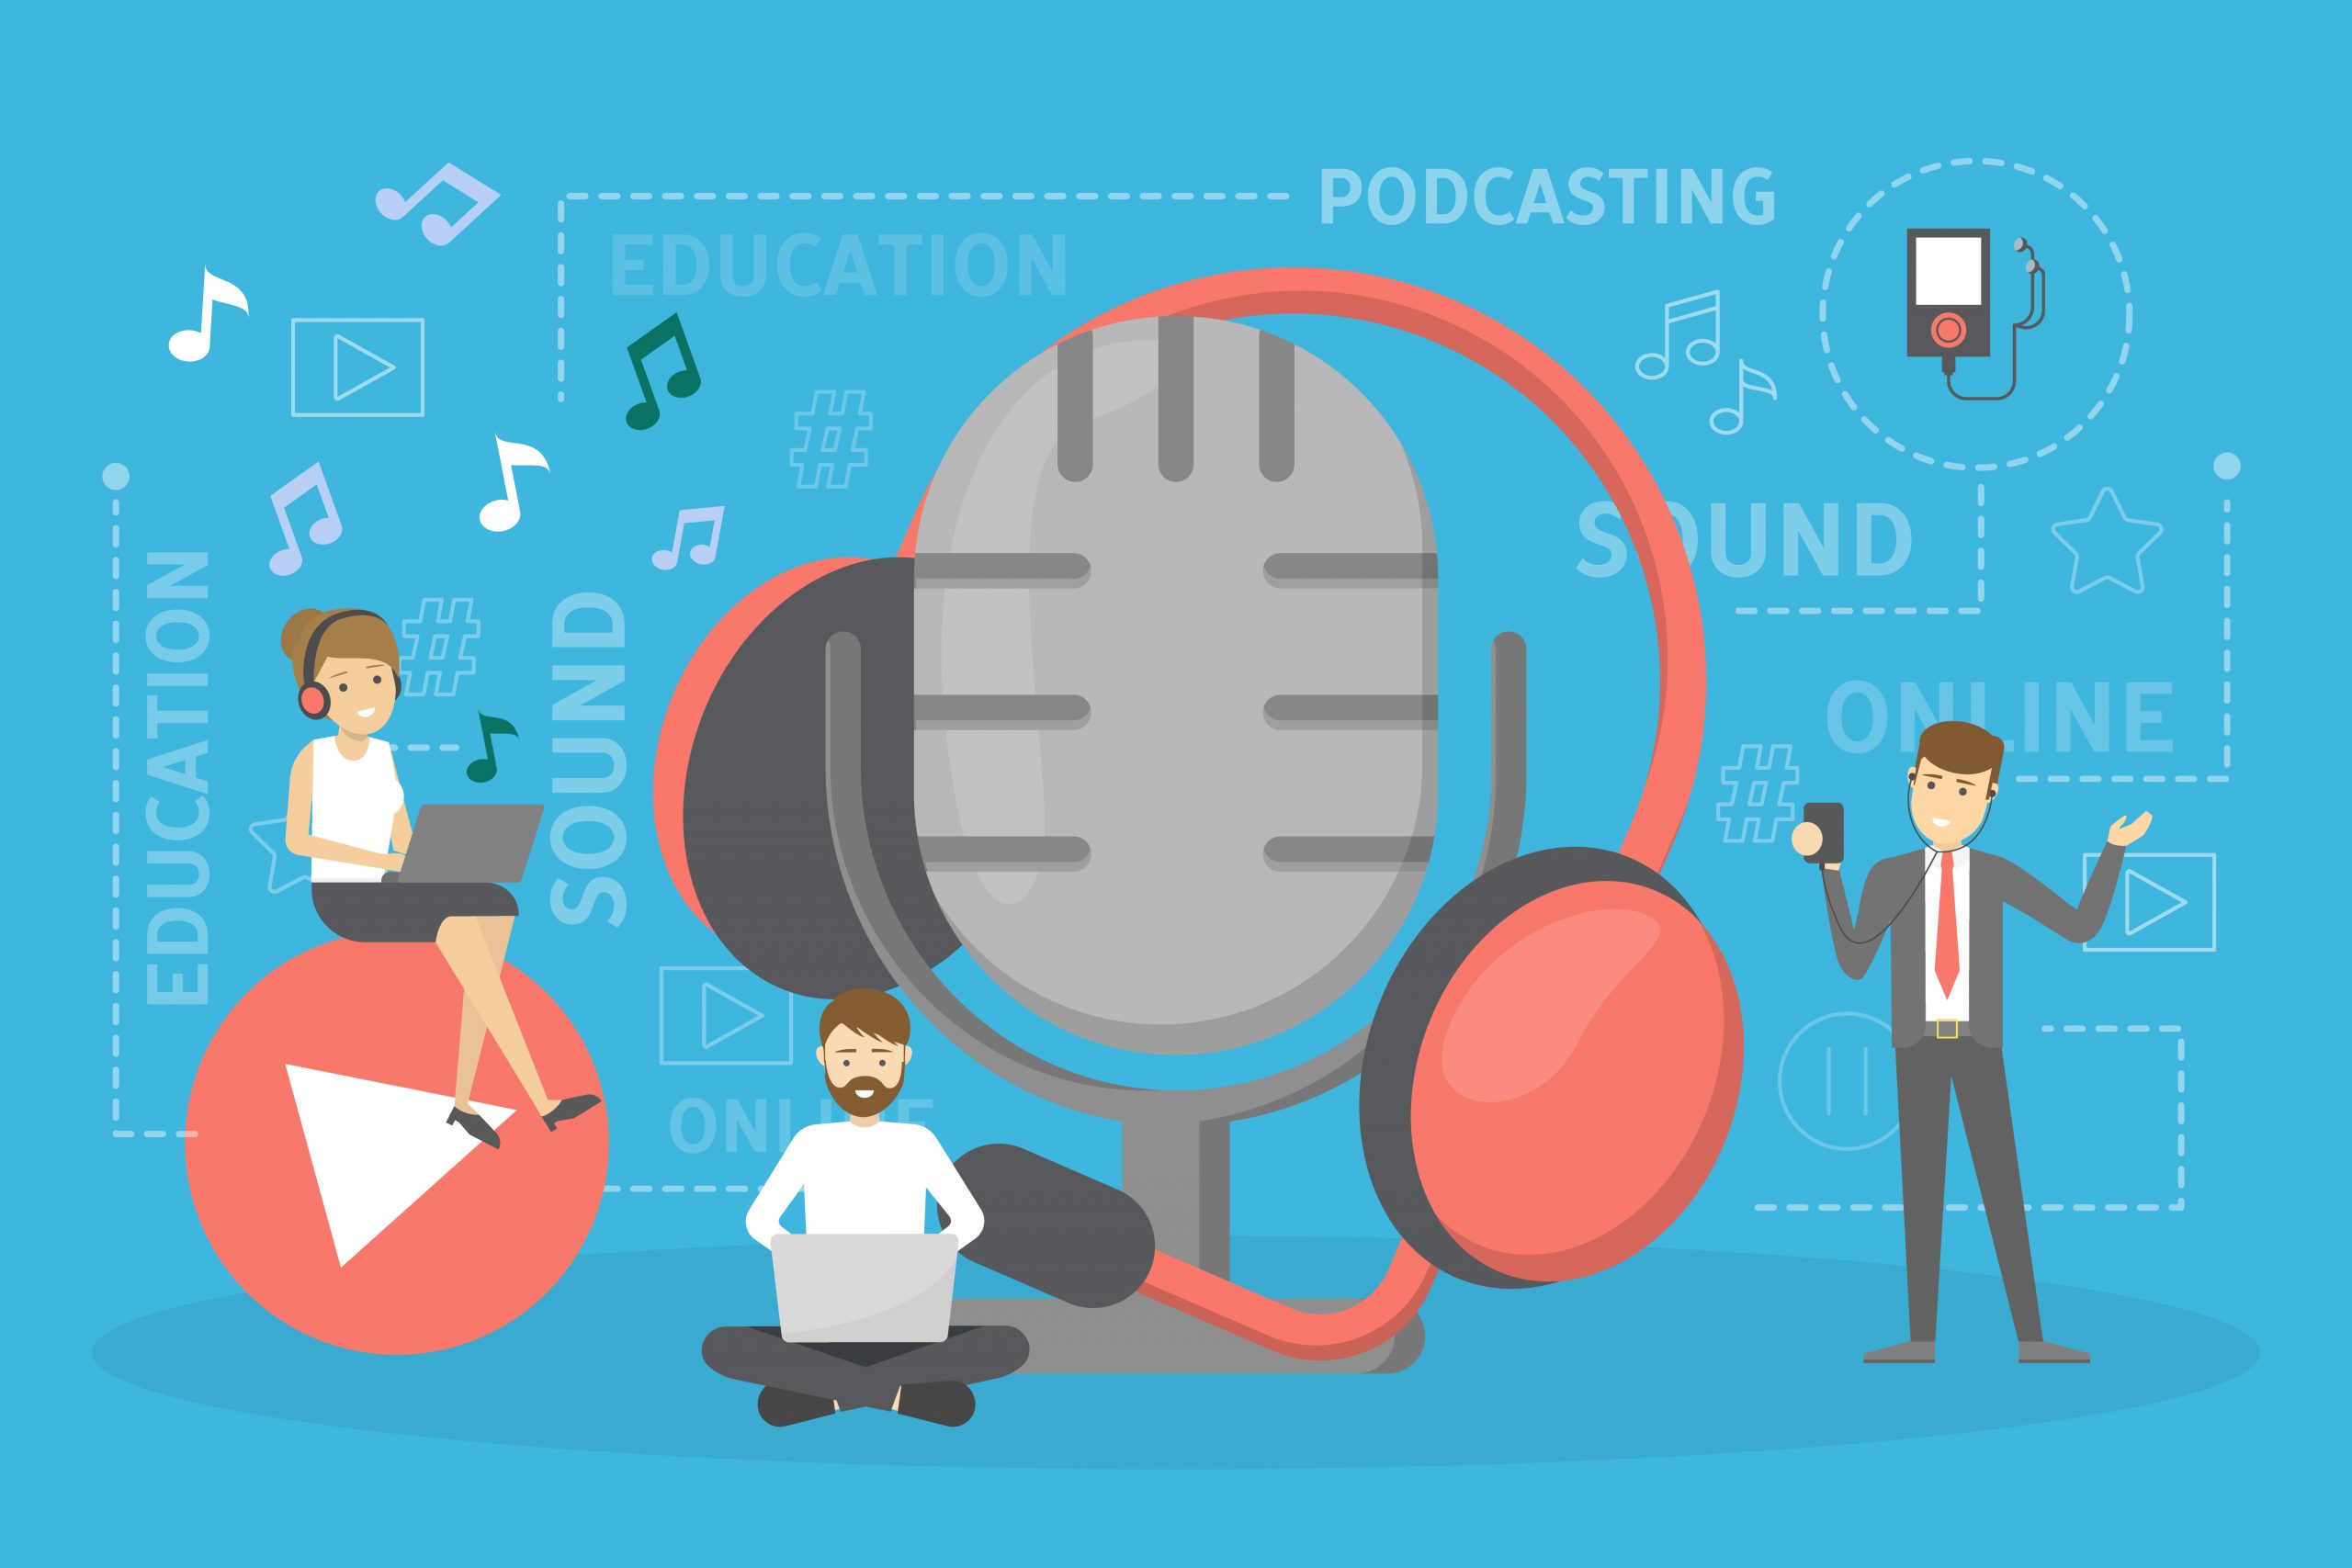 How to Market a Podcast to Grow your Business?